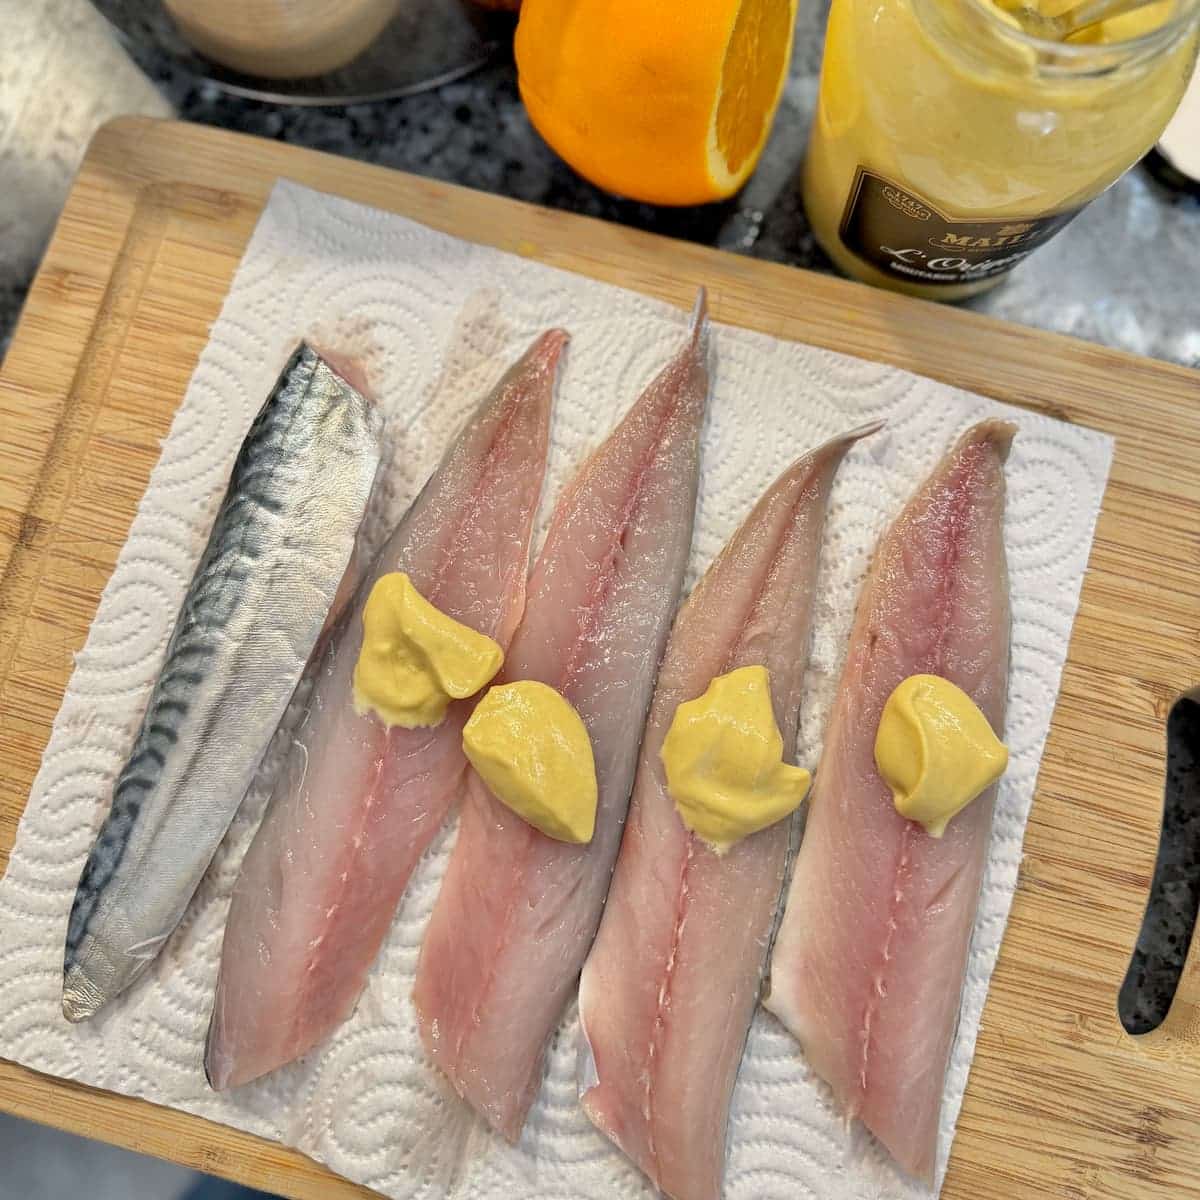 fillets of fresh mackerel fish topped with French Dijon mustard